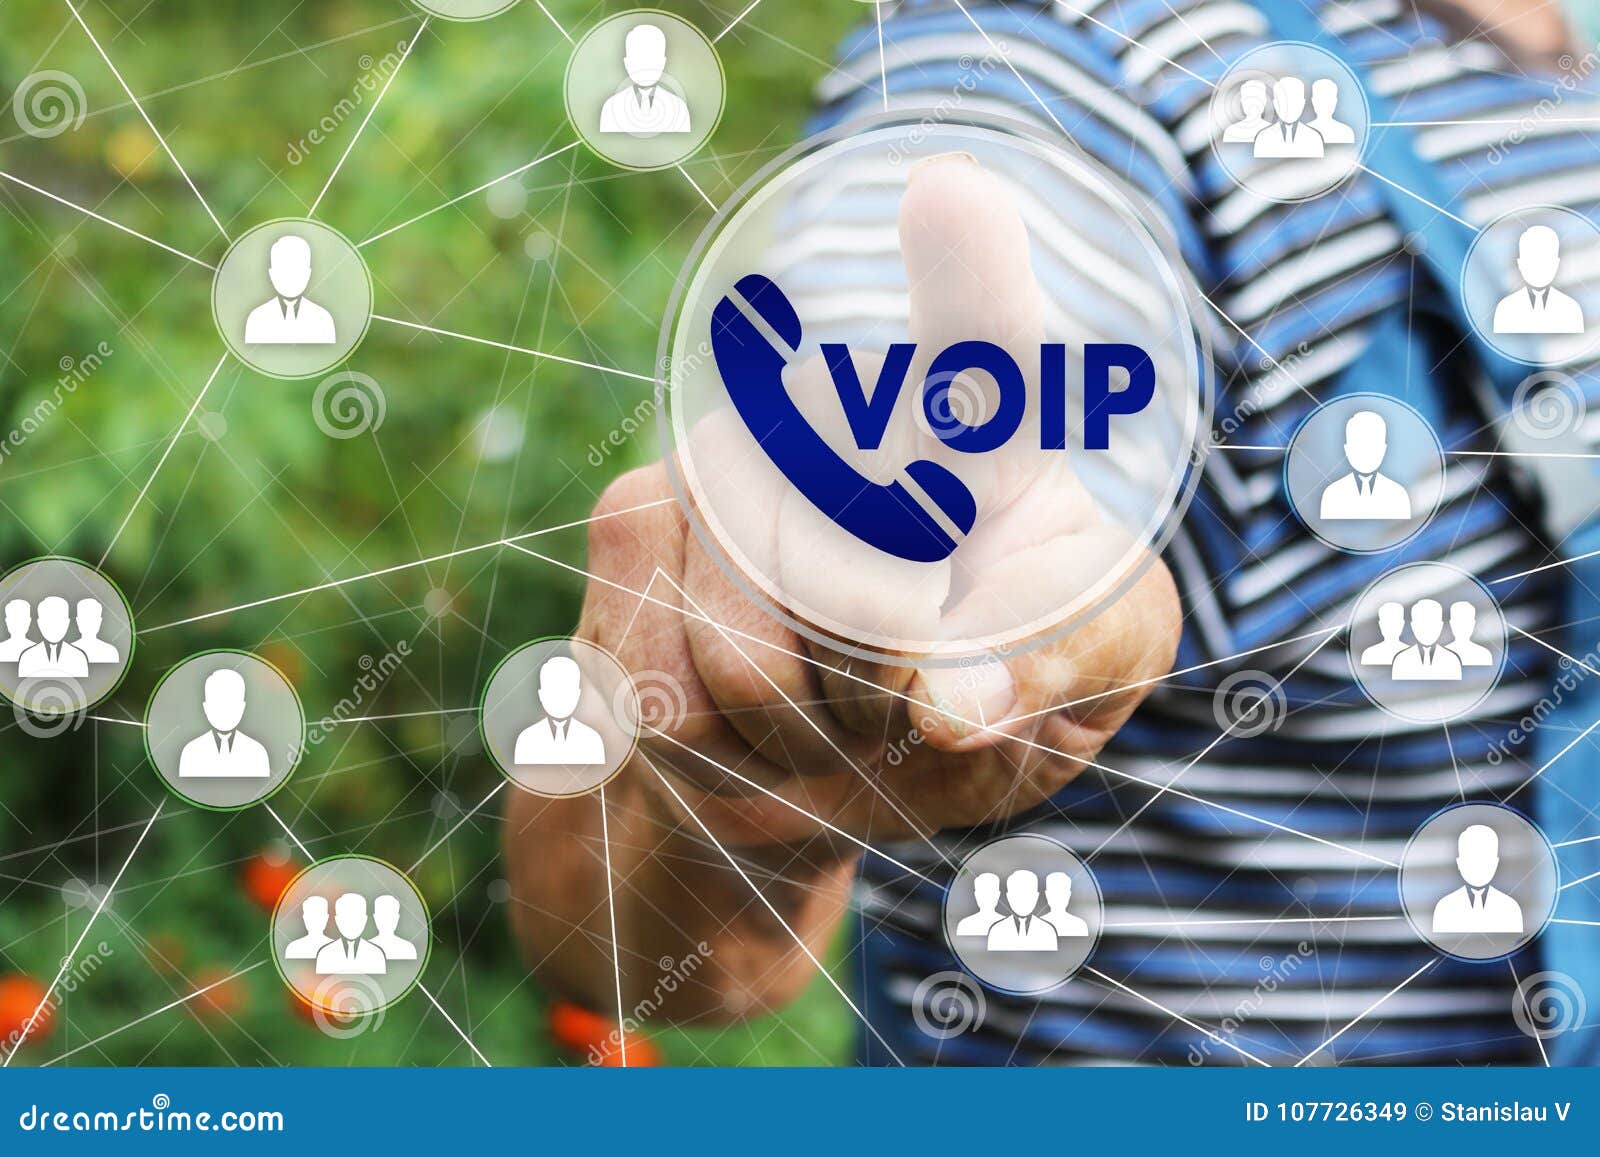 the businessman clicks the button voip on the touch screen.